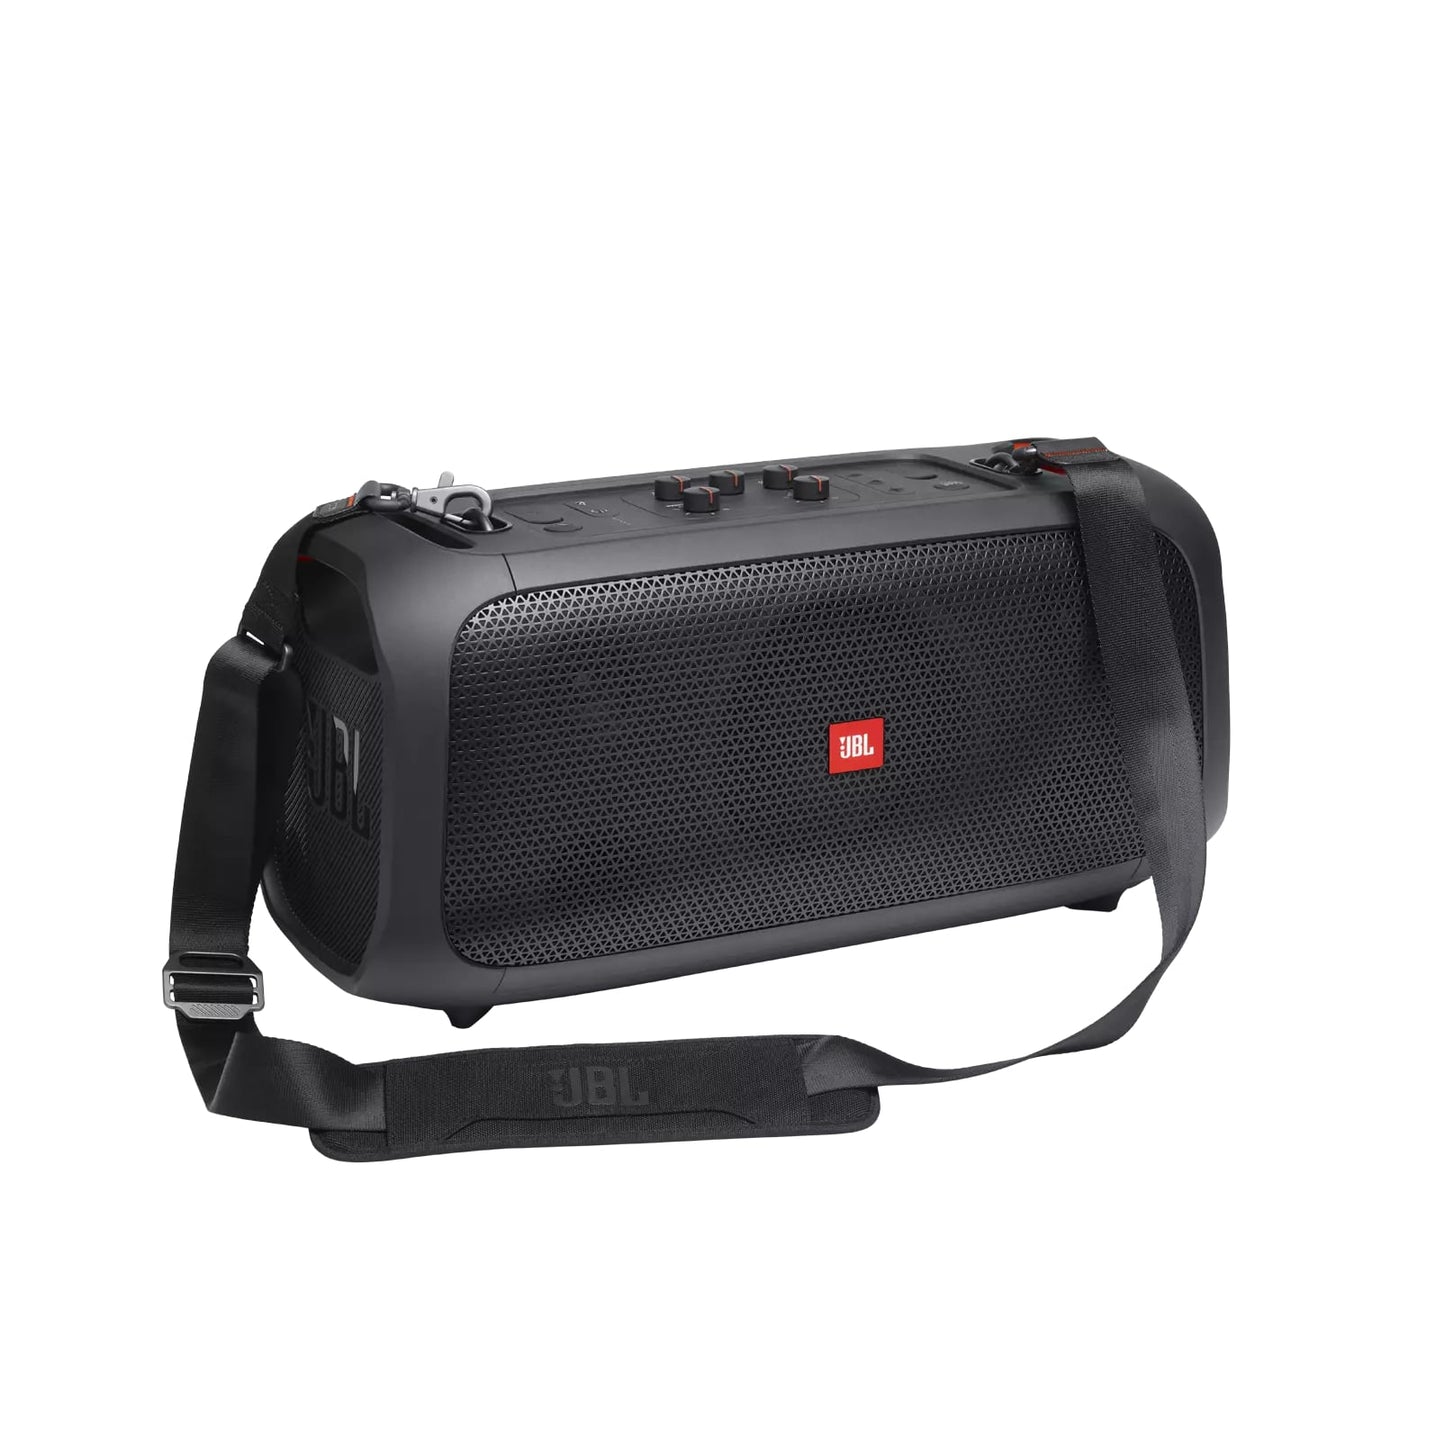 JBL PartyBox On-The-Go Portable Bluetooth Speaker System with IPX5 Water Resistant, Handheld Wireless Microphone with Max 10M Range, 6Hr Playtime and Built-In Shoulder Straps for Outdoor Travel and Events